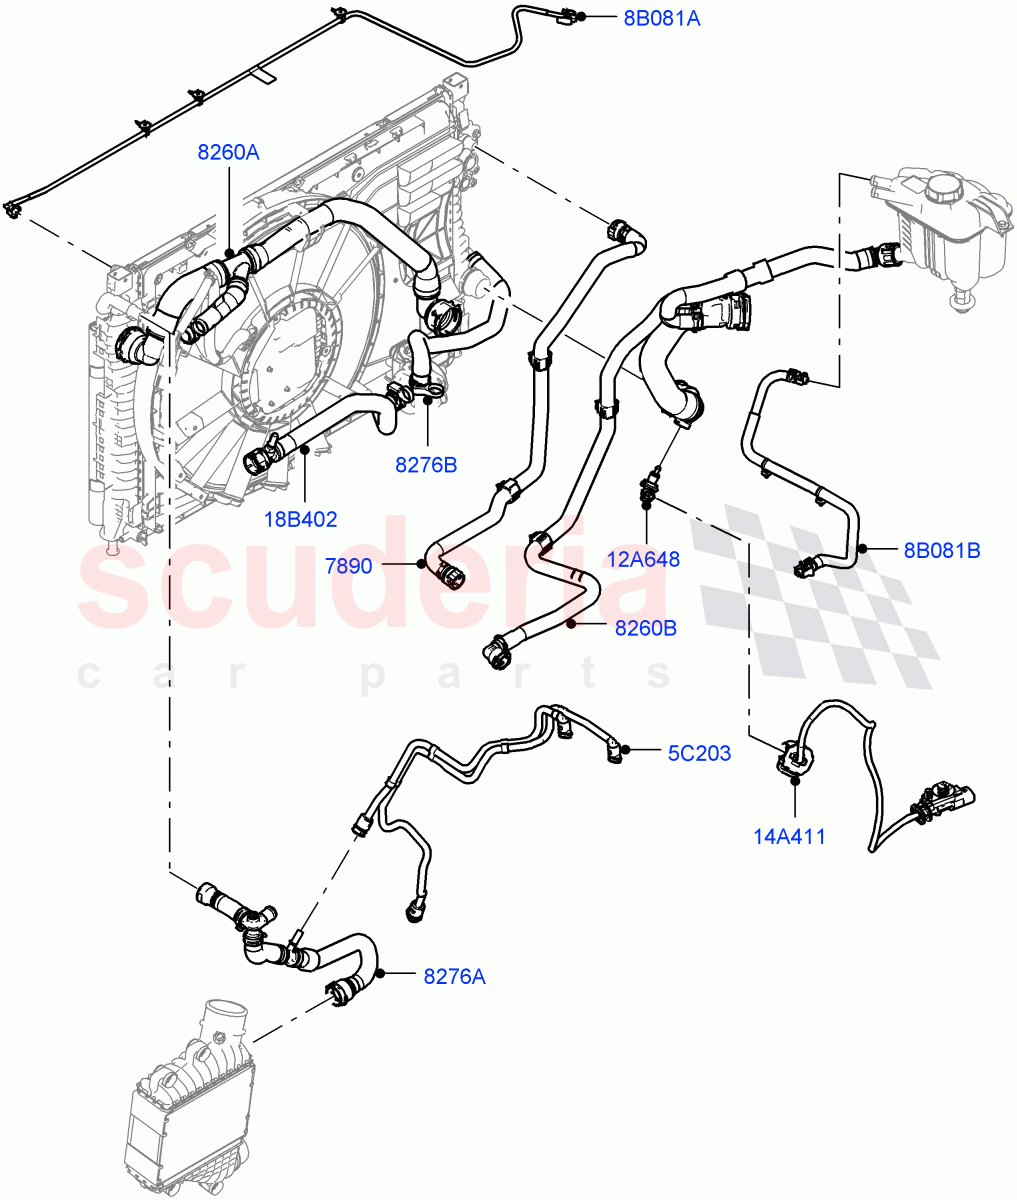 Cooling System Pipes And Hoses(2.0L AJ20D4 Diesel Mid PTA,Itatiaia (Brazil),Fuel Tank-Diesel With Filters)((V)FROMLT000001) of Land Rover Land Rover Discovery Sport (2015+) [2.0 Turbo Diesel]